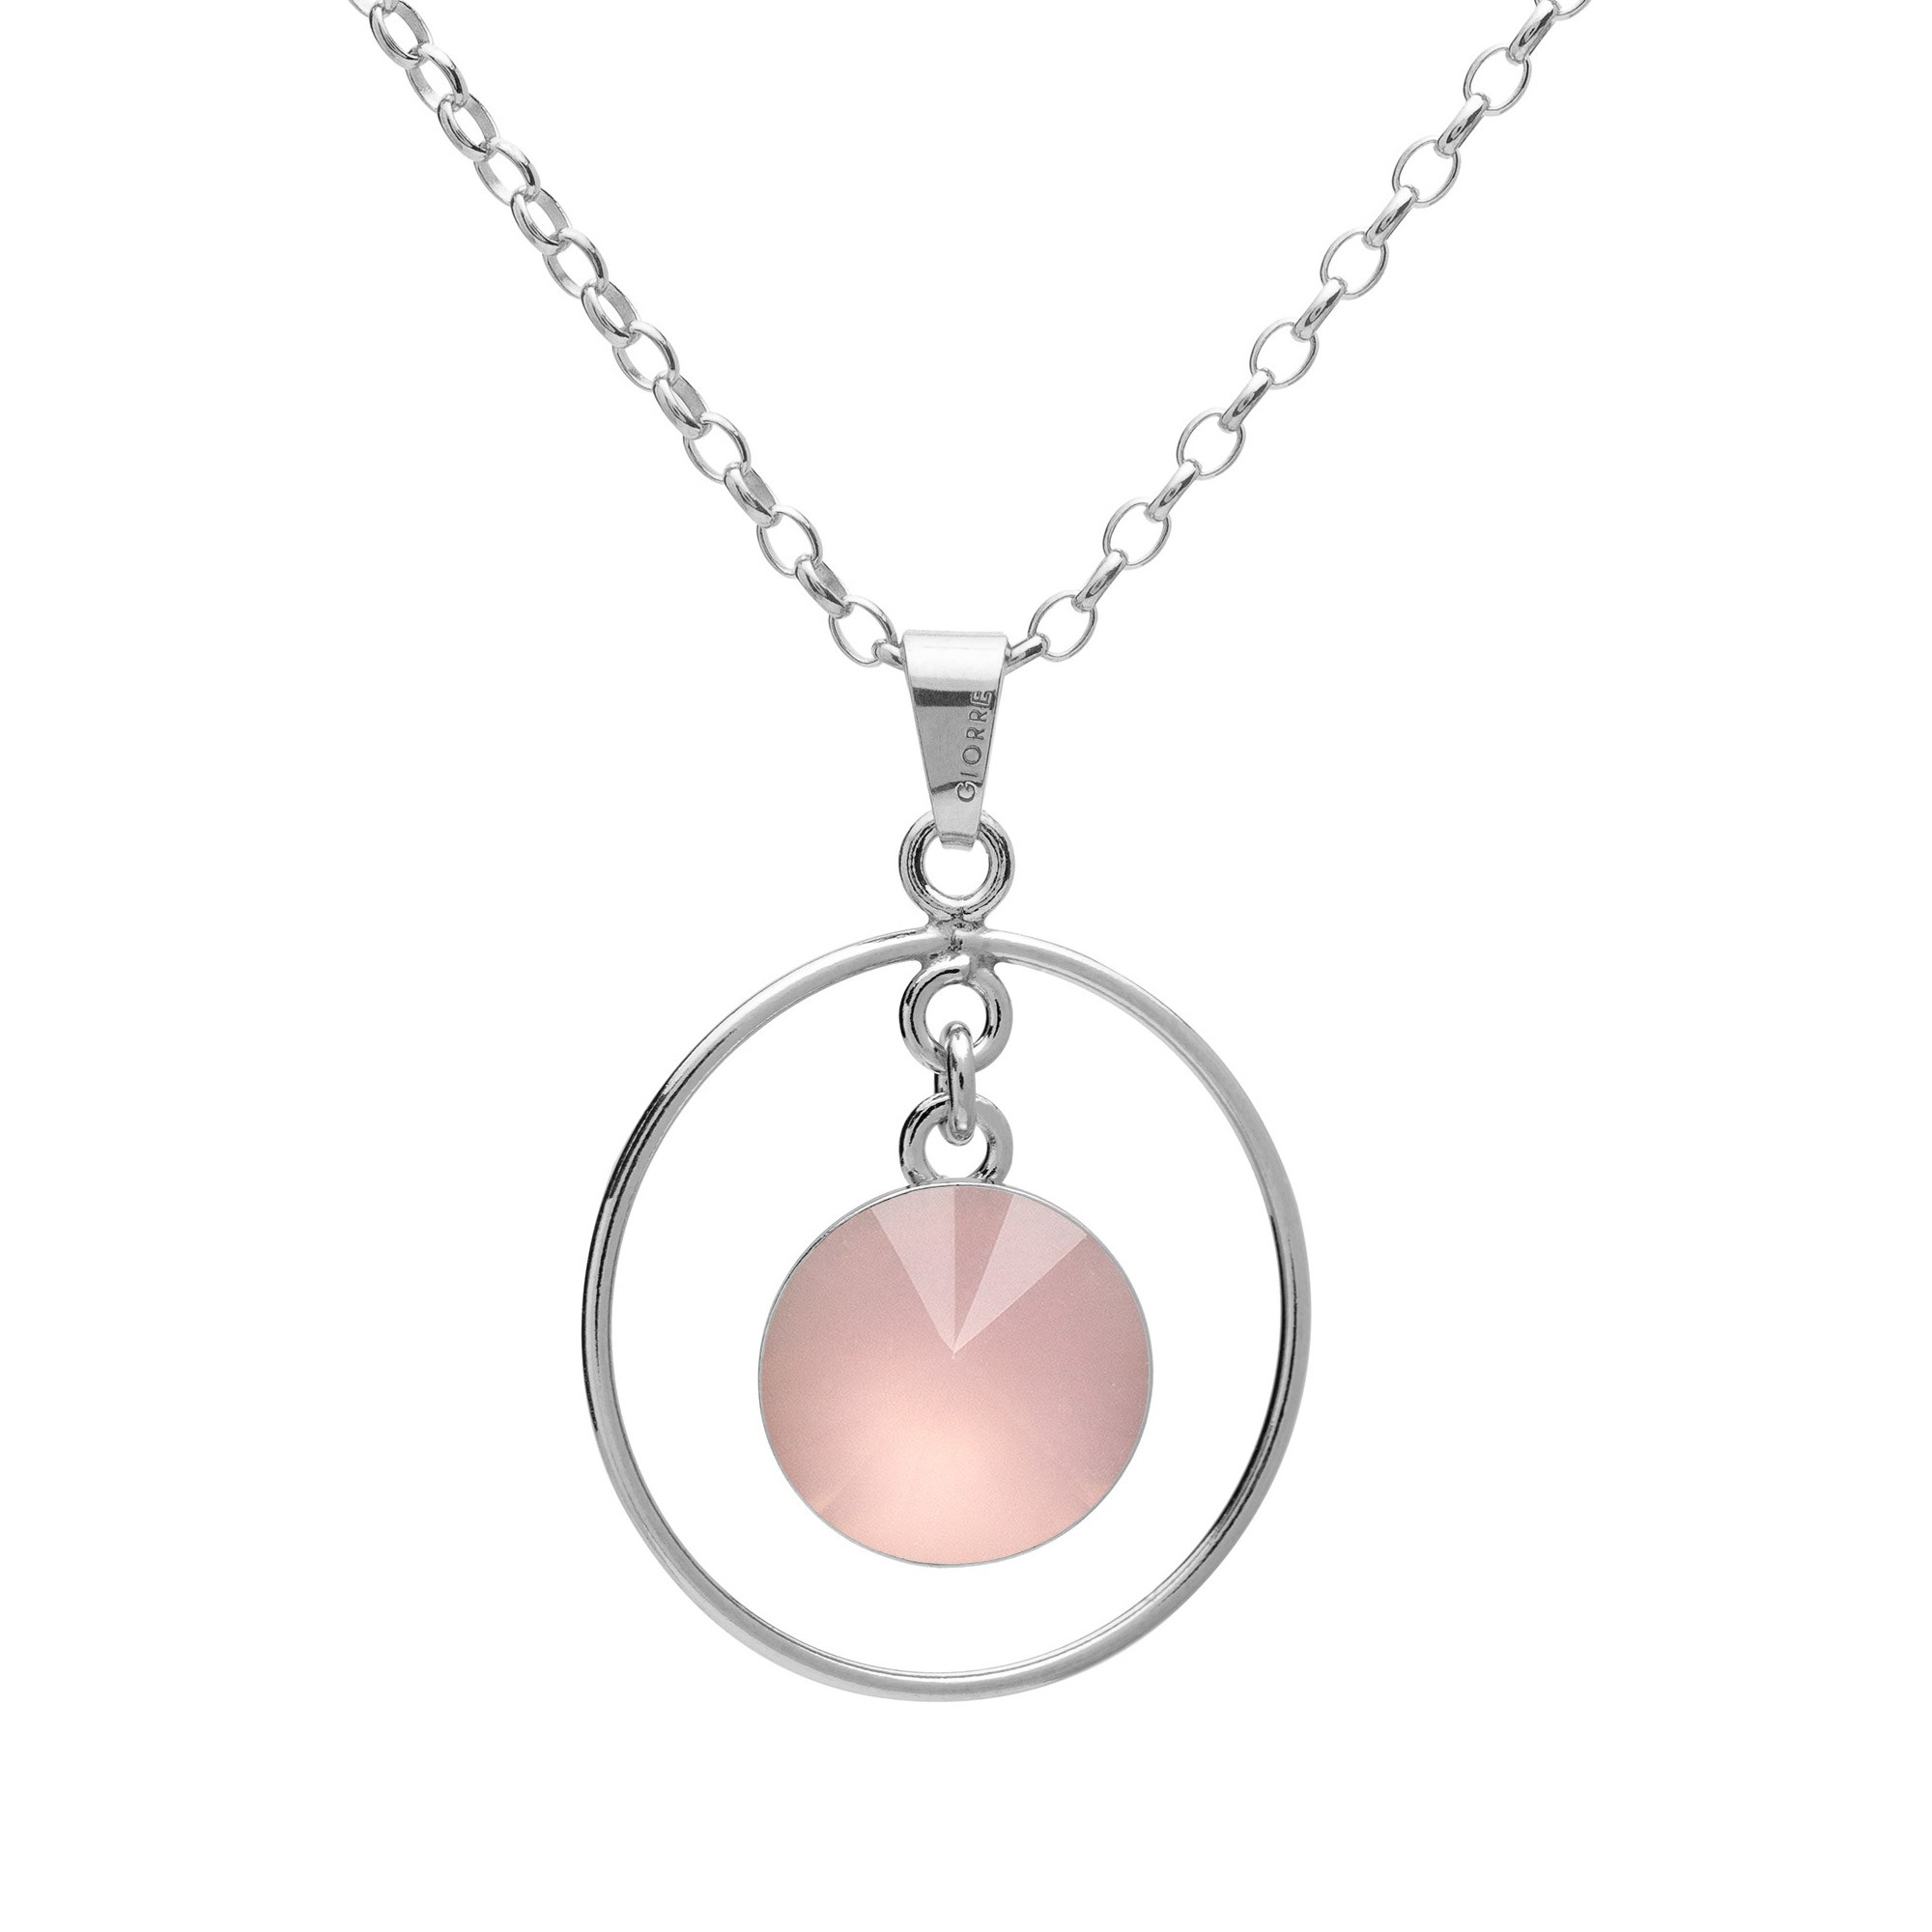 Round pendant natural stone necklace, sterling silver 925